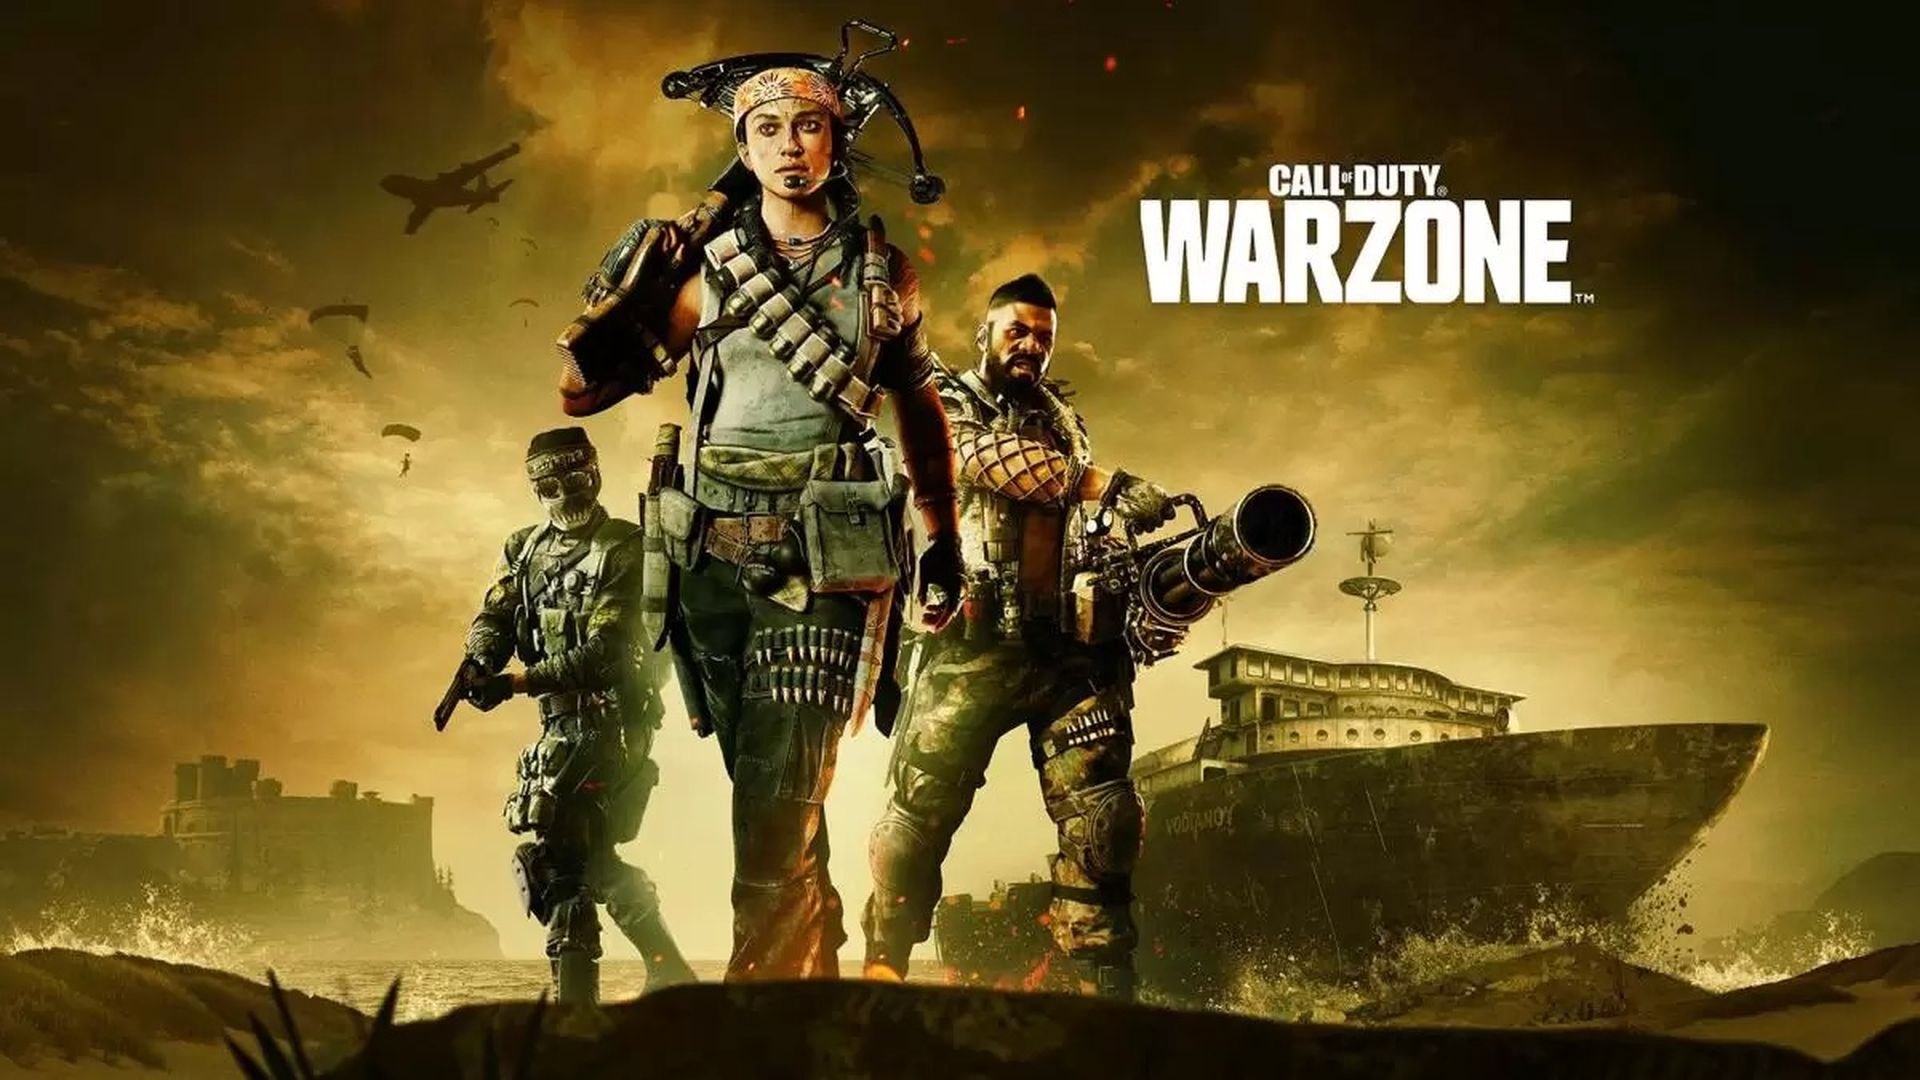 Do you want to learn everything in CoD Warzone season 4 patch notes? Let's get going.